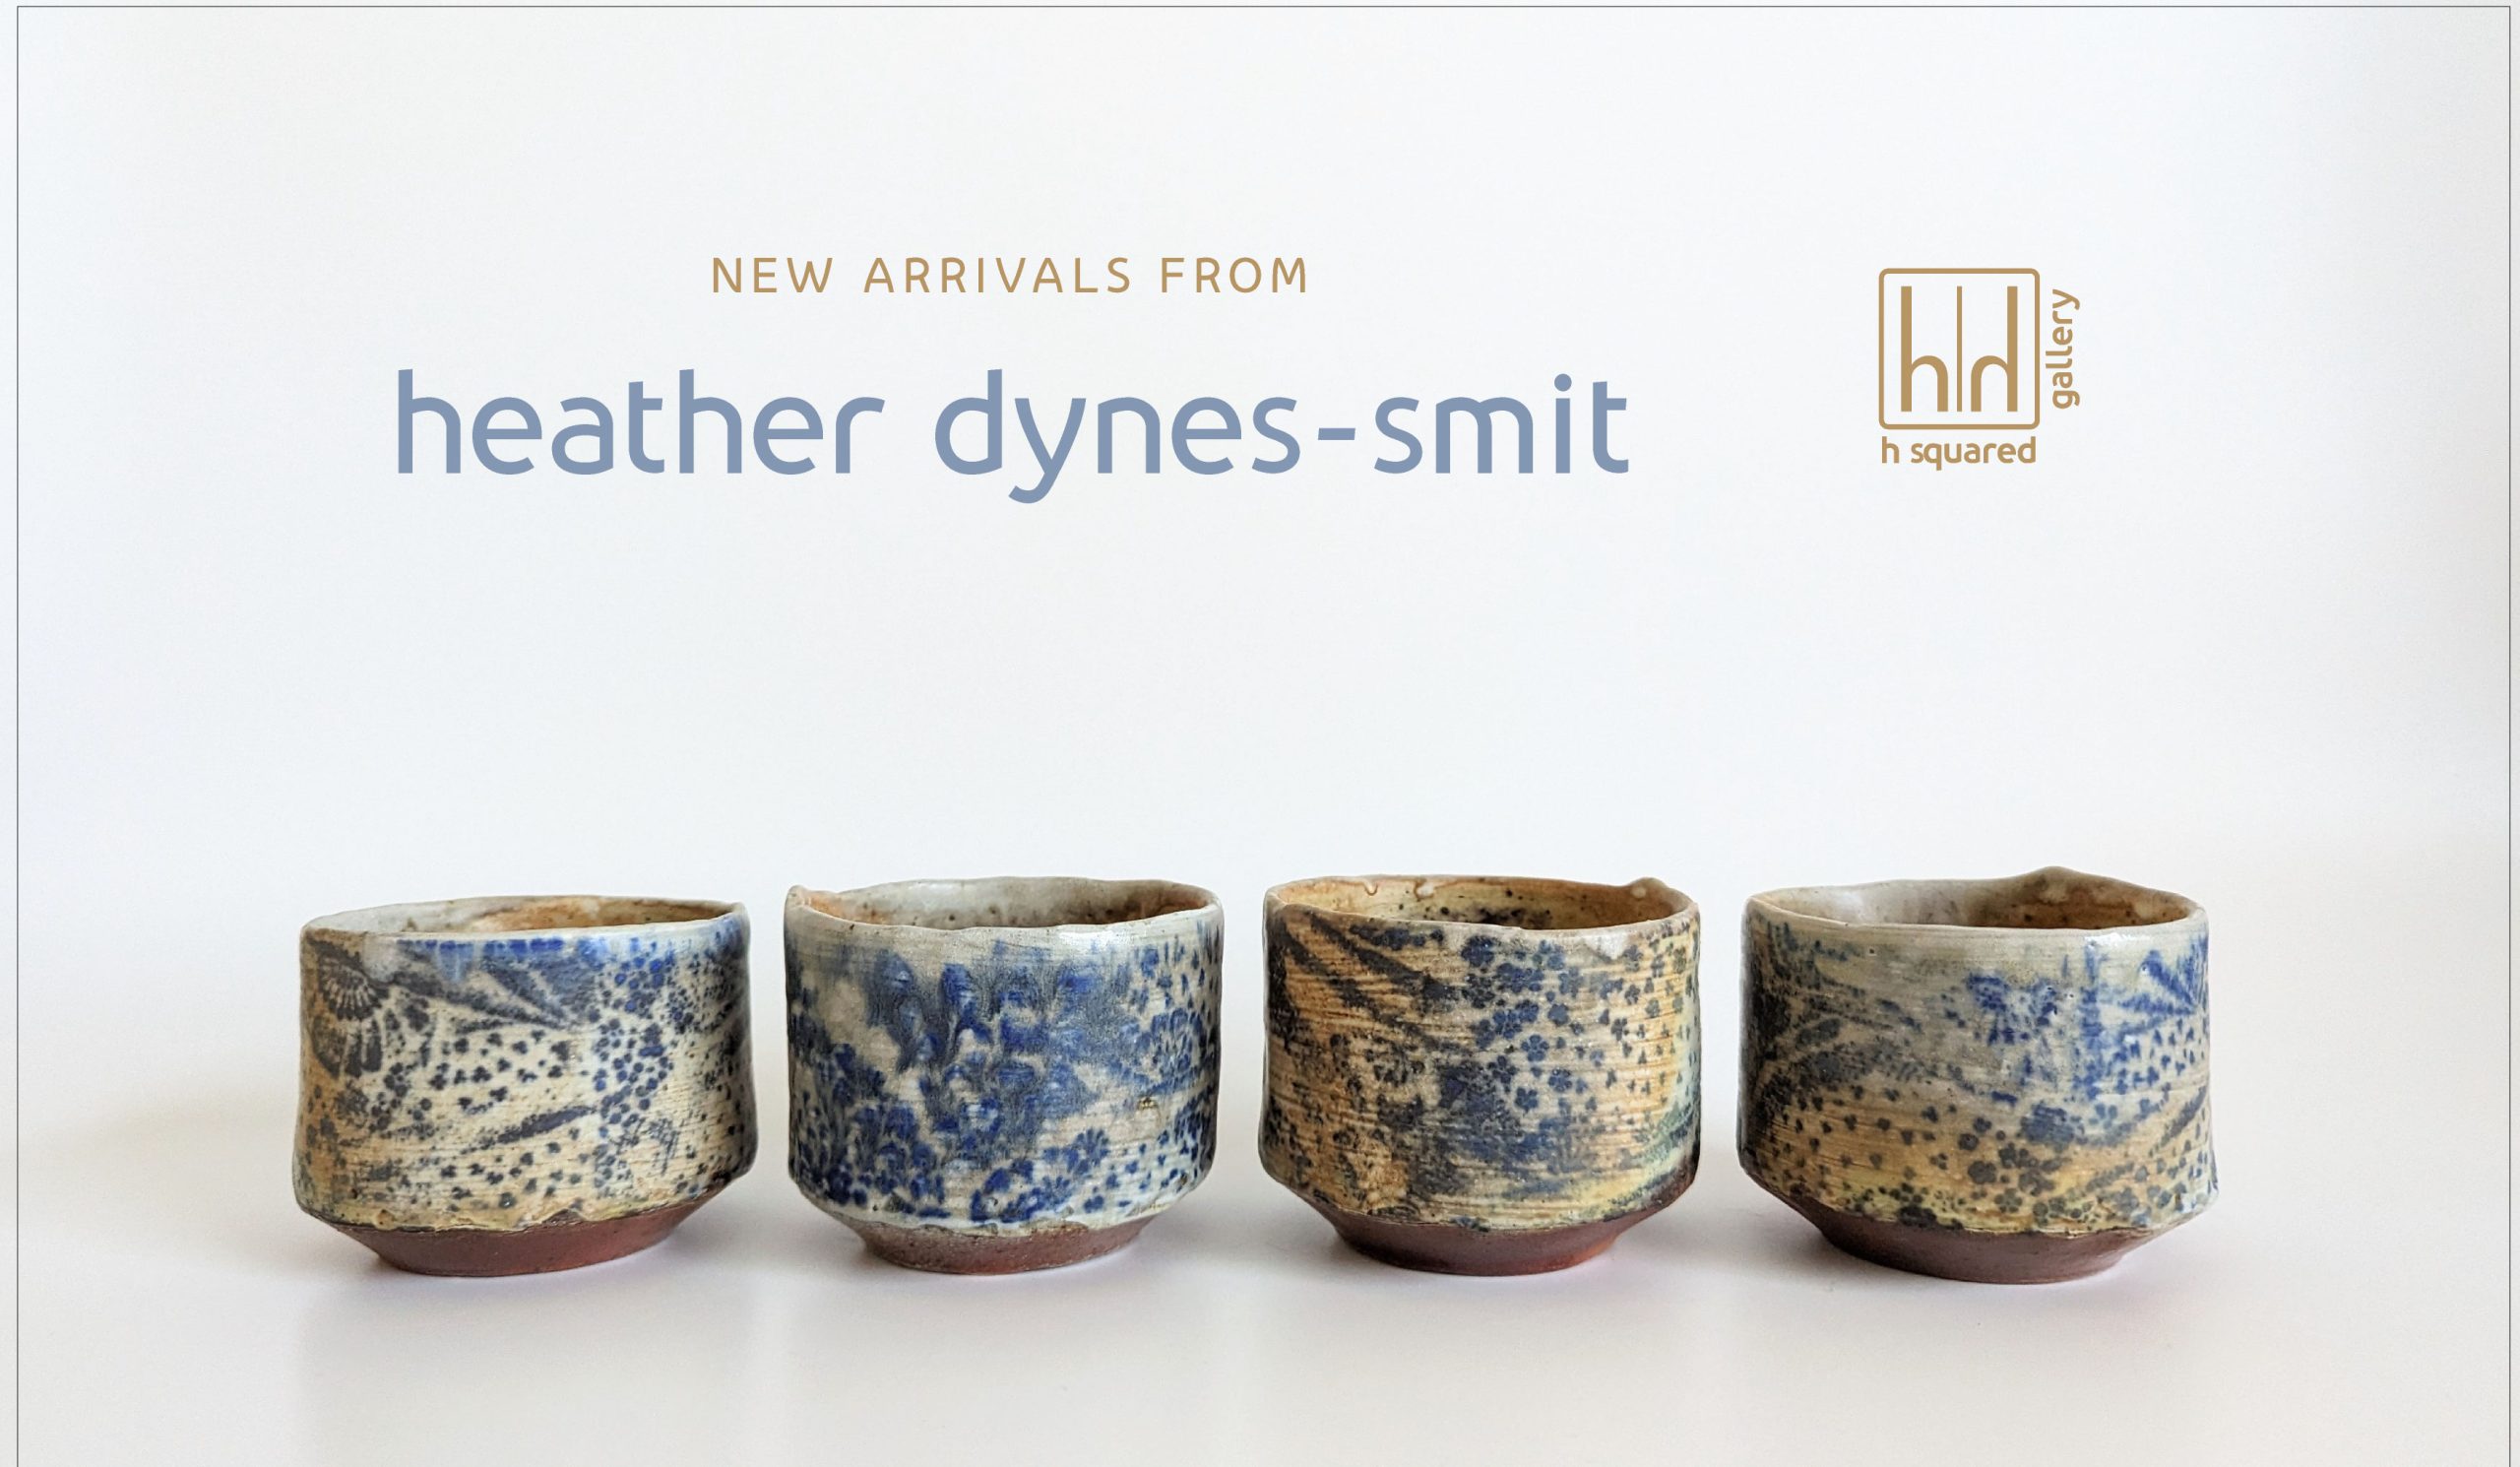 Heather Dynes-Smit's latest pottery delivery to h squared gallery in Fernie, new pots, teapots, spreaders, and more hand built ceramic art